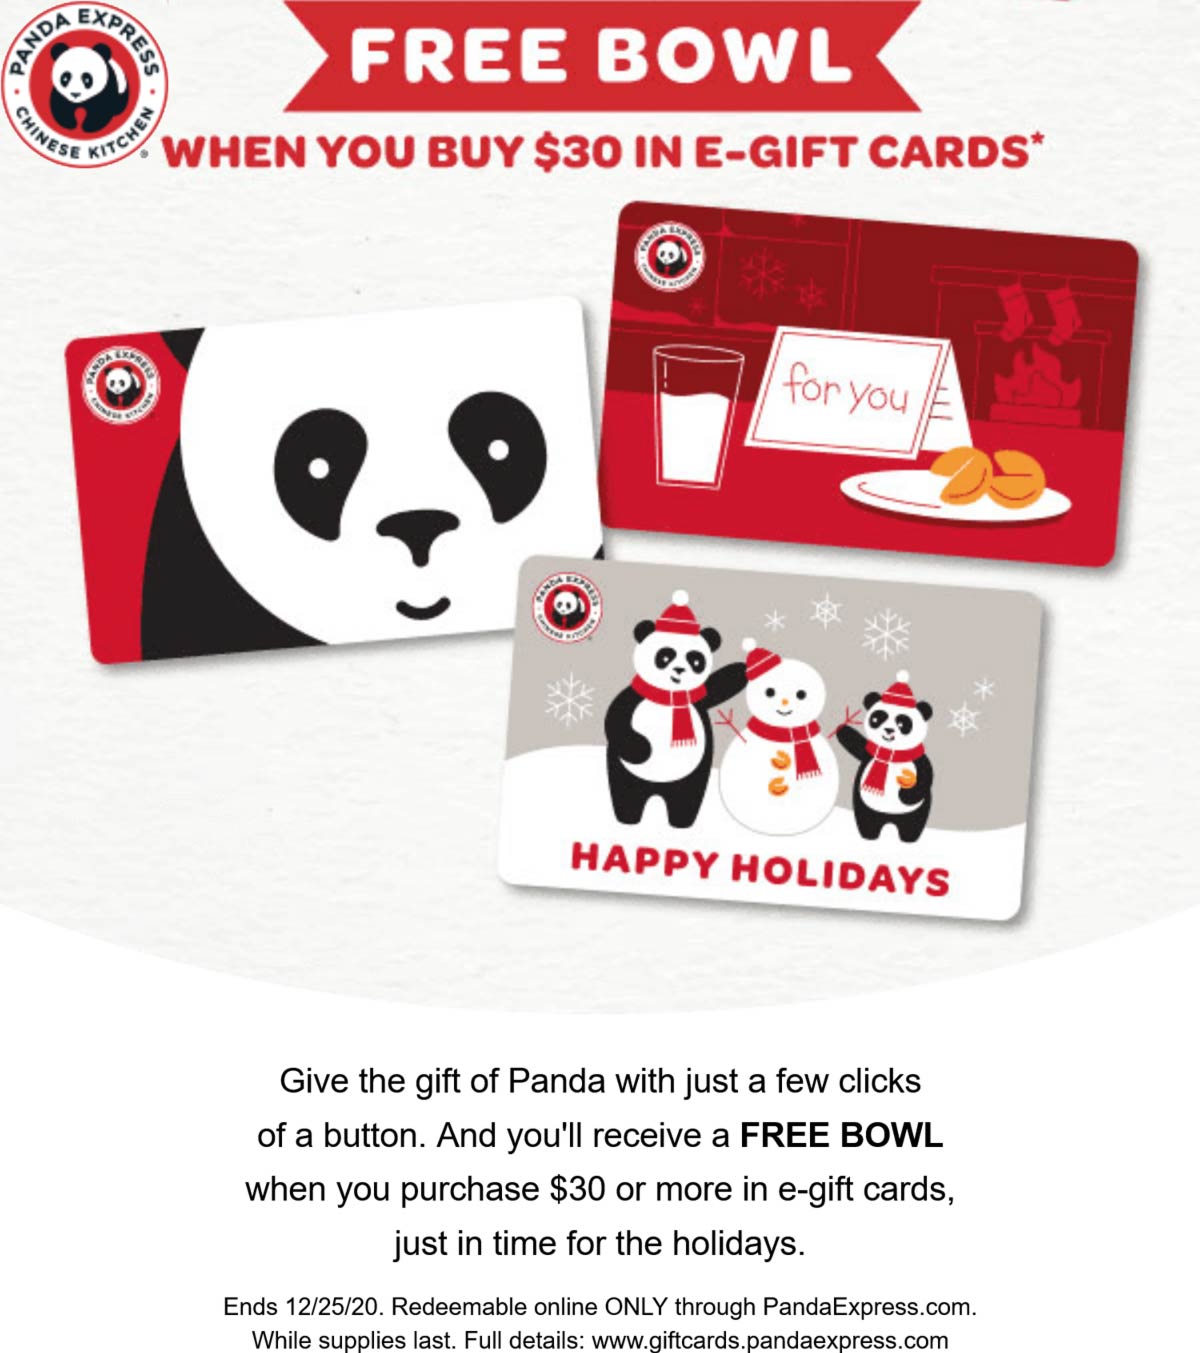 Free bowl with 30 in egift cards at Panda Express restaurants 